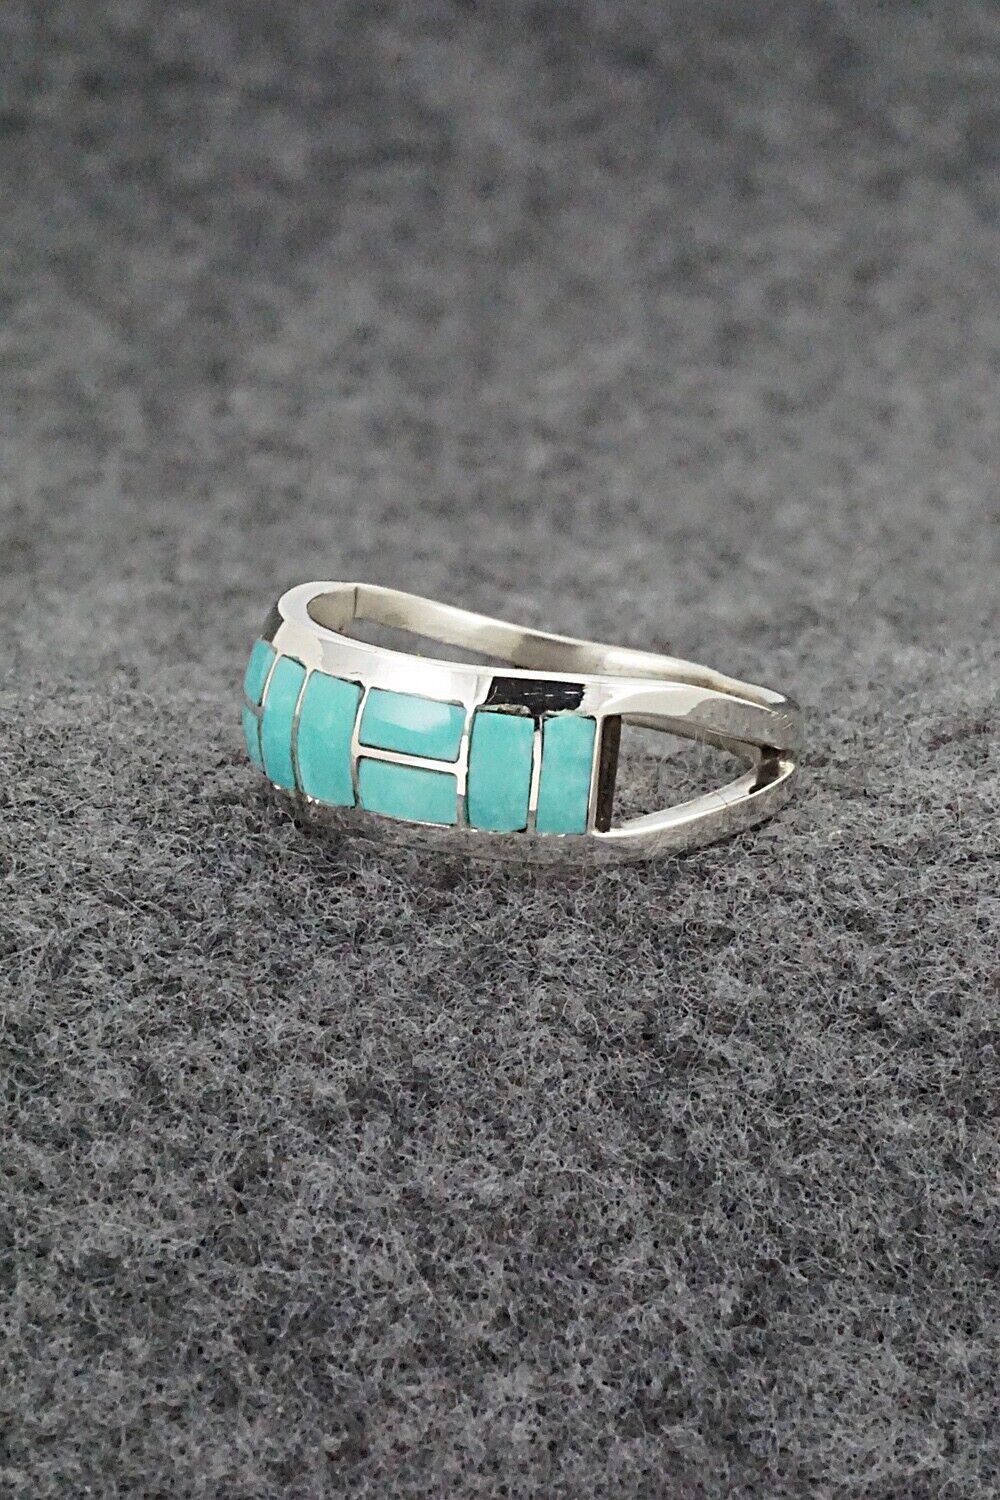 Turquoise & Sterling Silver Inlay Ring - Sibert Bowannie - Size 9